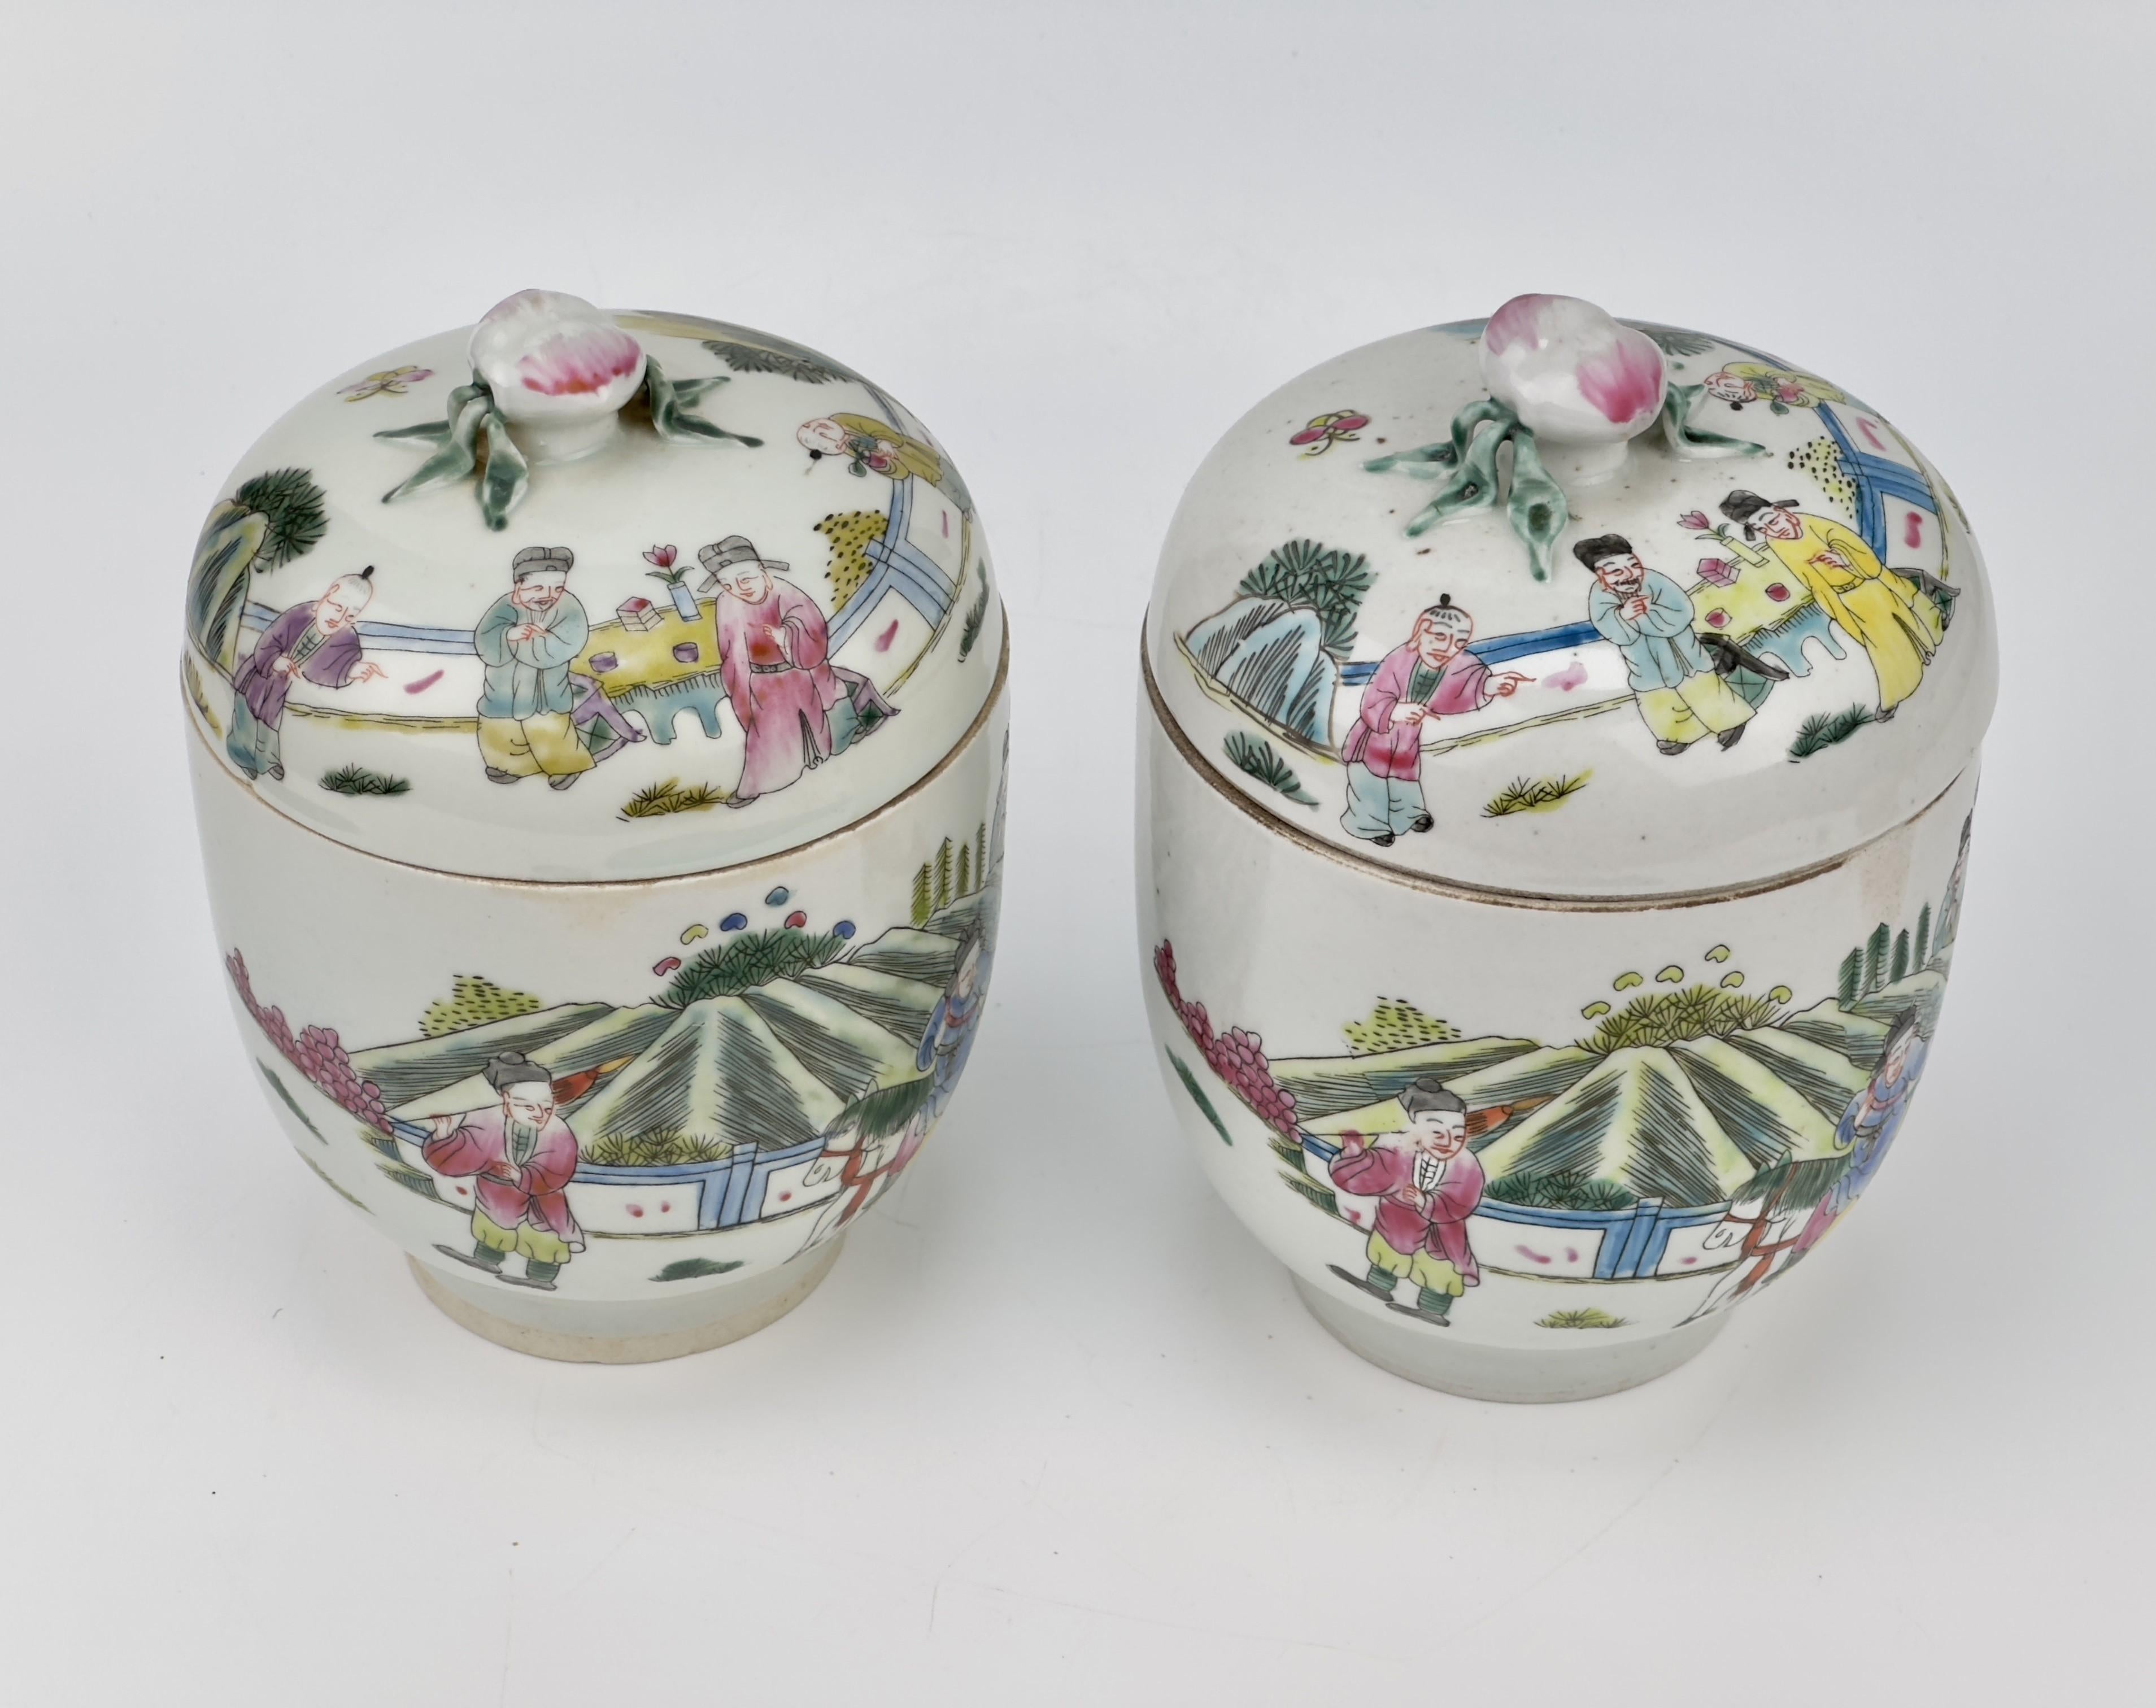 Two Chinese Famille Verte Jars with Horseback Riding, Qing Period, Tongzhi Era For Sale 5